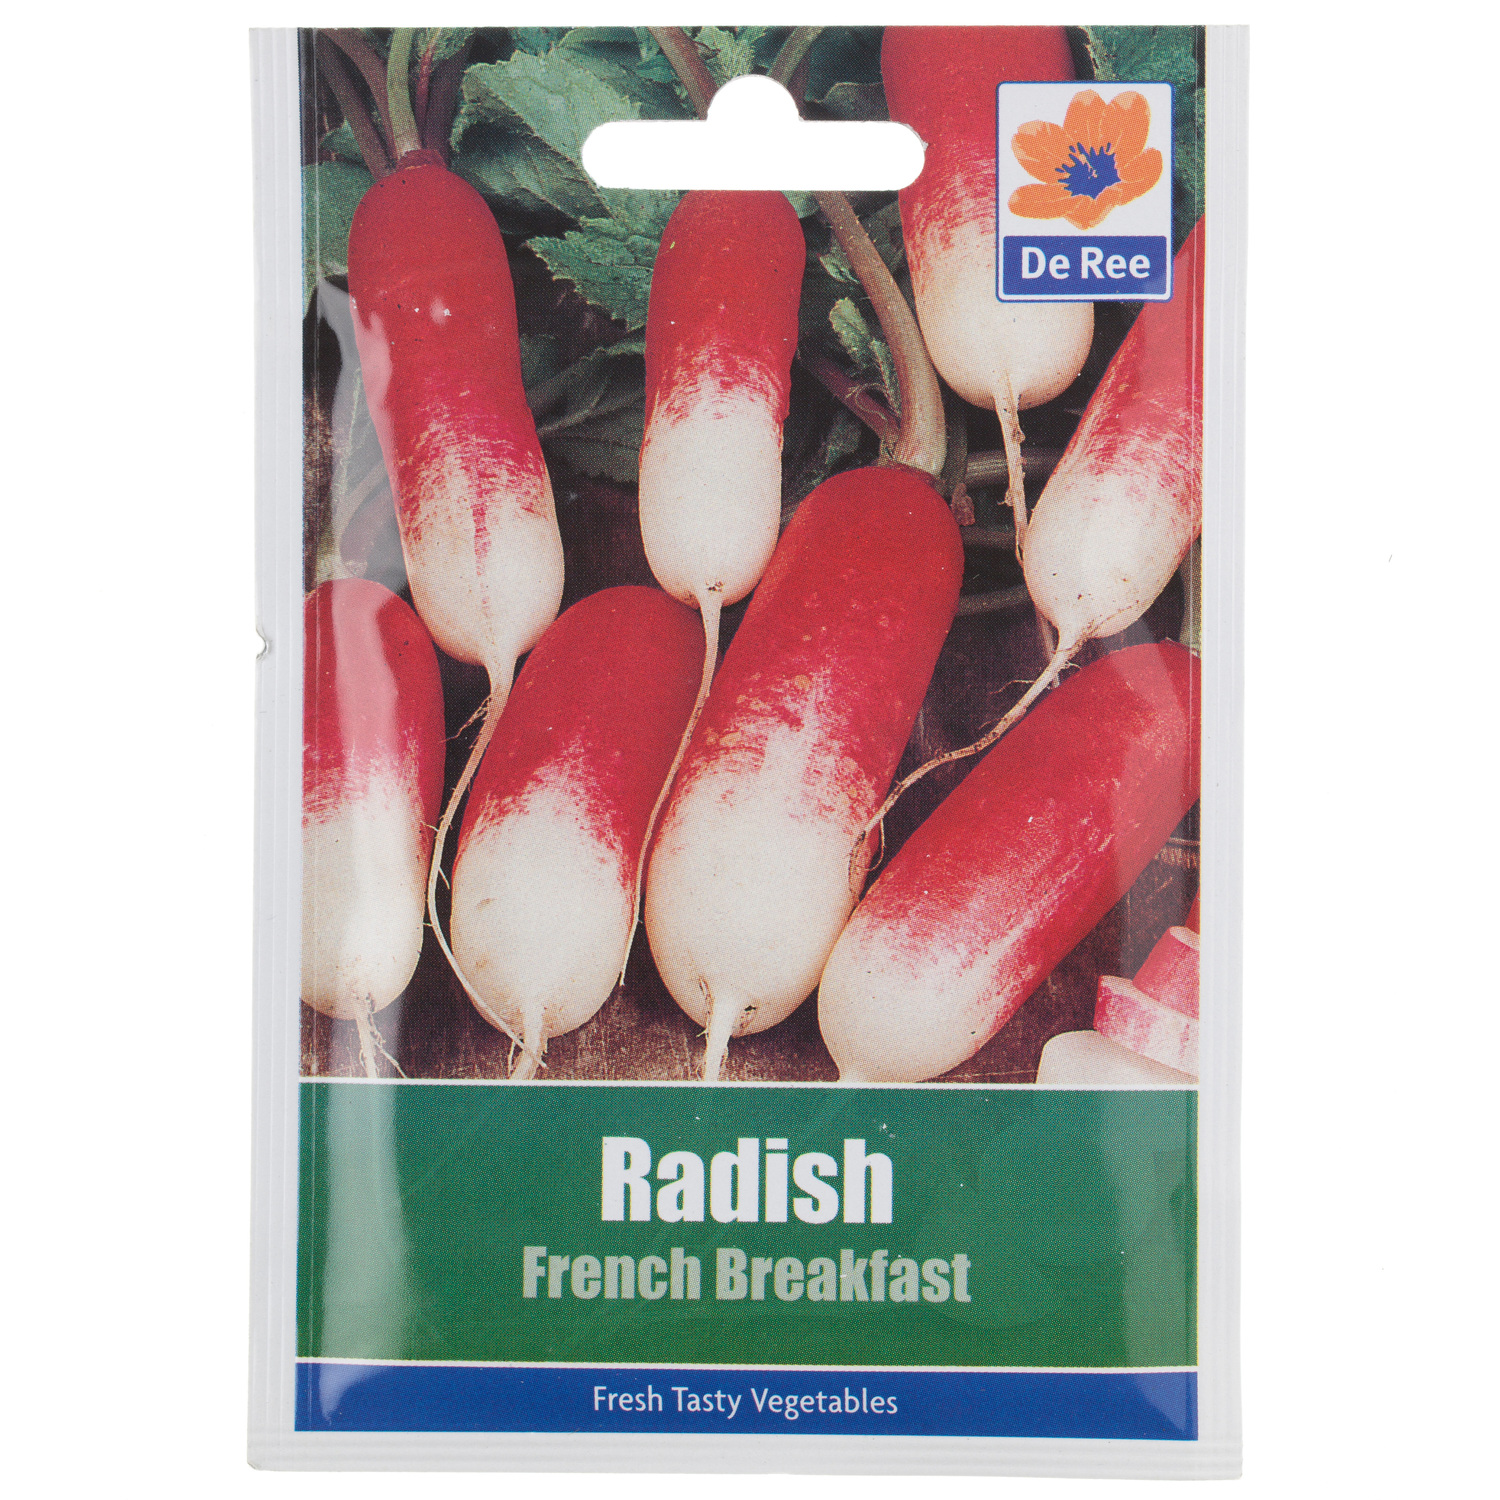 De Ree French Breakfast Radish Seed Packet Image